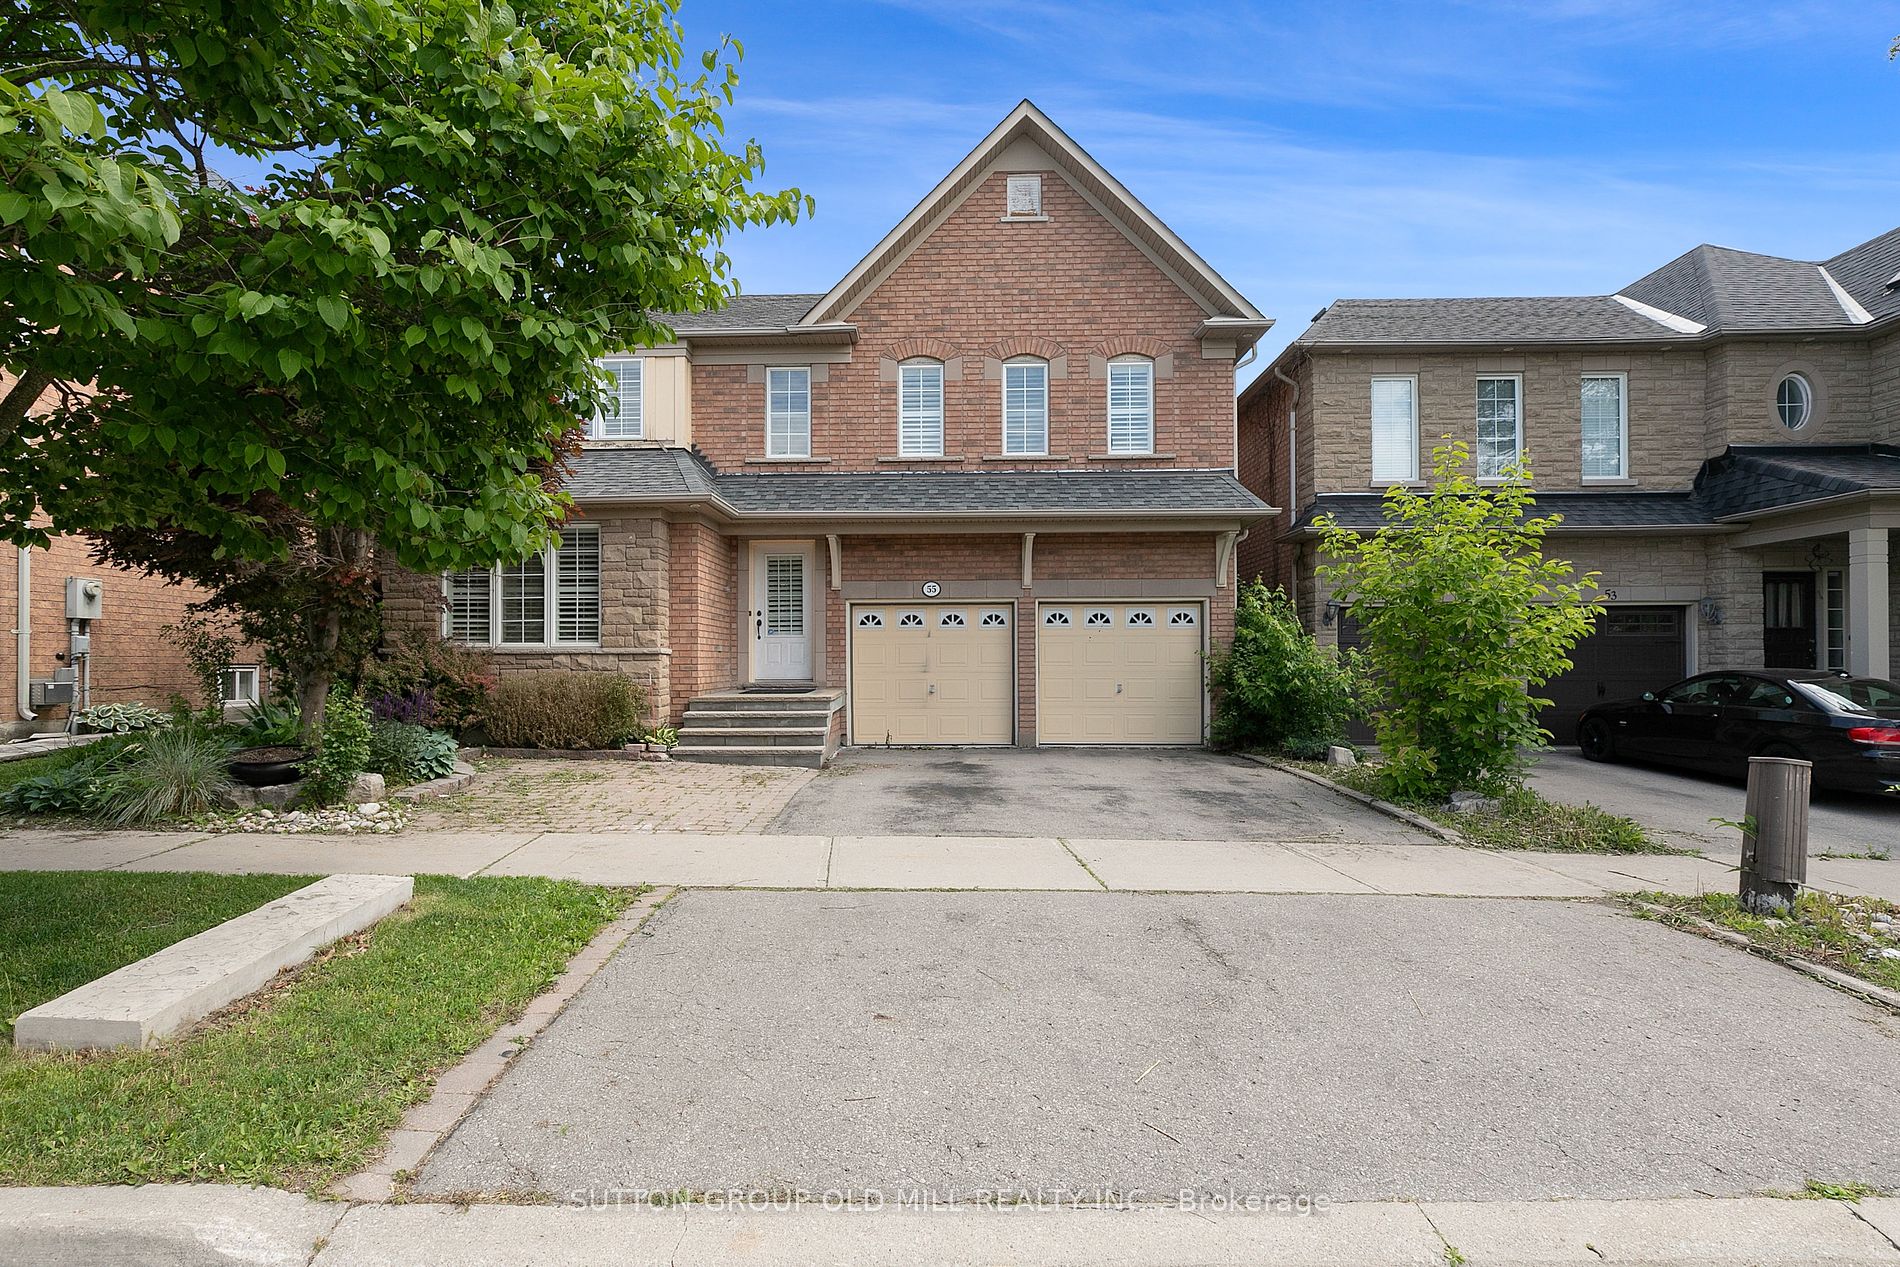 Detached house for sale at 55 Greenbank Dr Richmond Hill Ontario